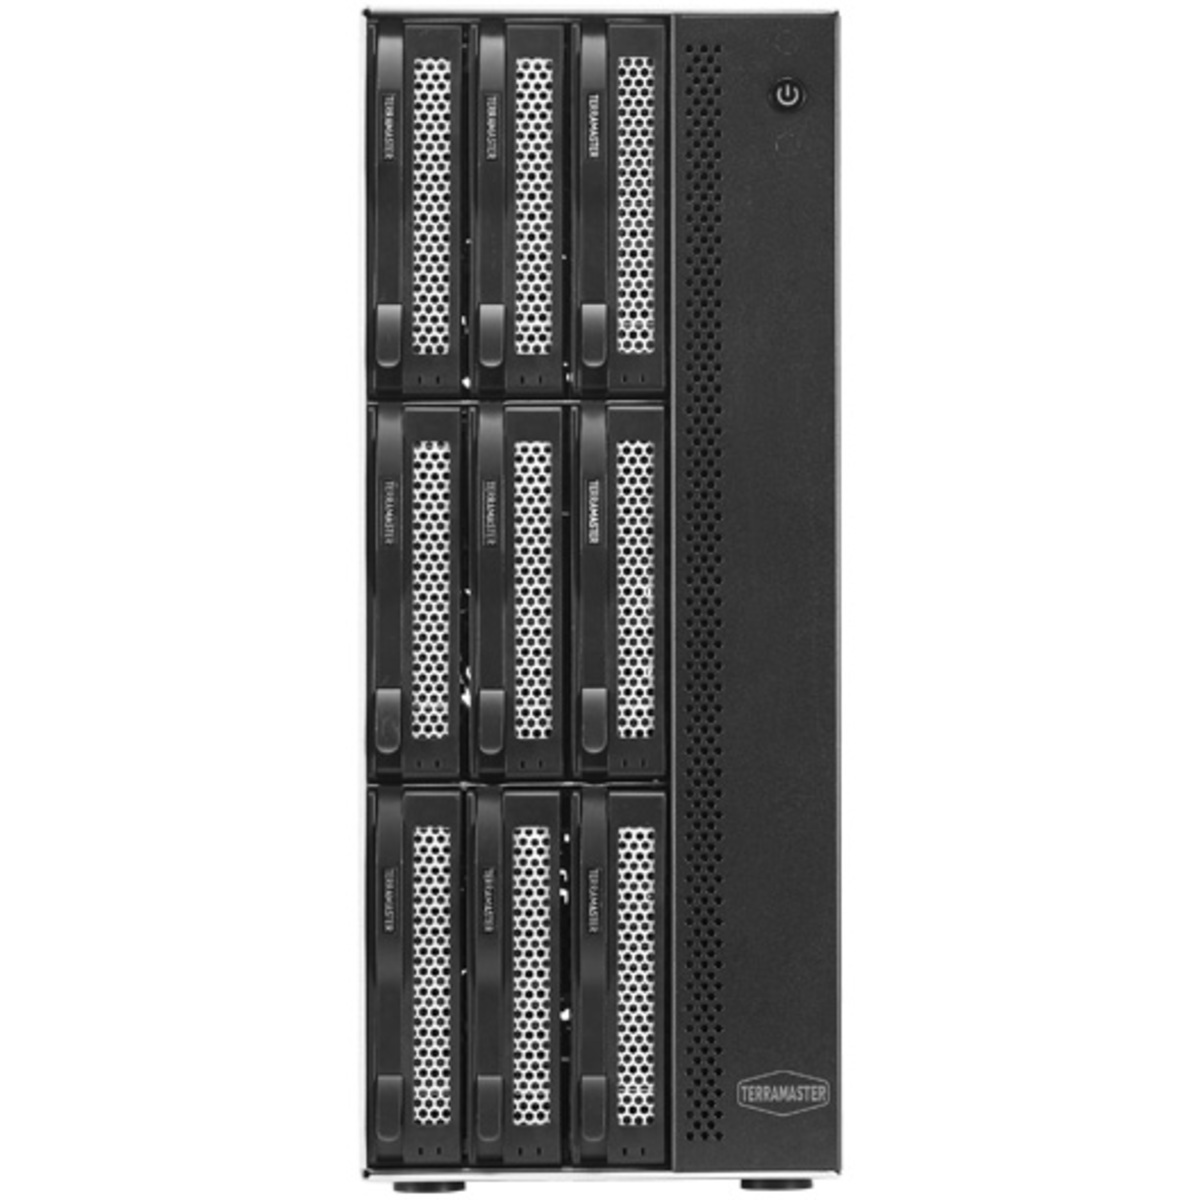 TerraMaster T9-450 120tb 9-Bay Desktop Multimedia / Power User / Business NAS - Network Attached Storage Device 5x24tb Seagate IronWolf Pro ST24000NT002 3.5 7200rpm SATA 6Gb/s HDD NAS Class Drives Installed - Burn-In Tested T9-450